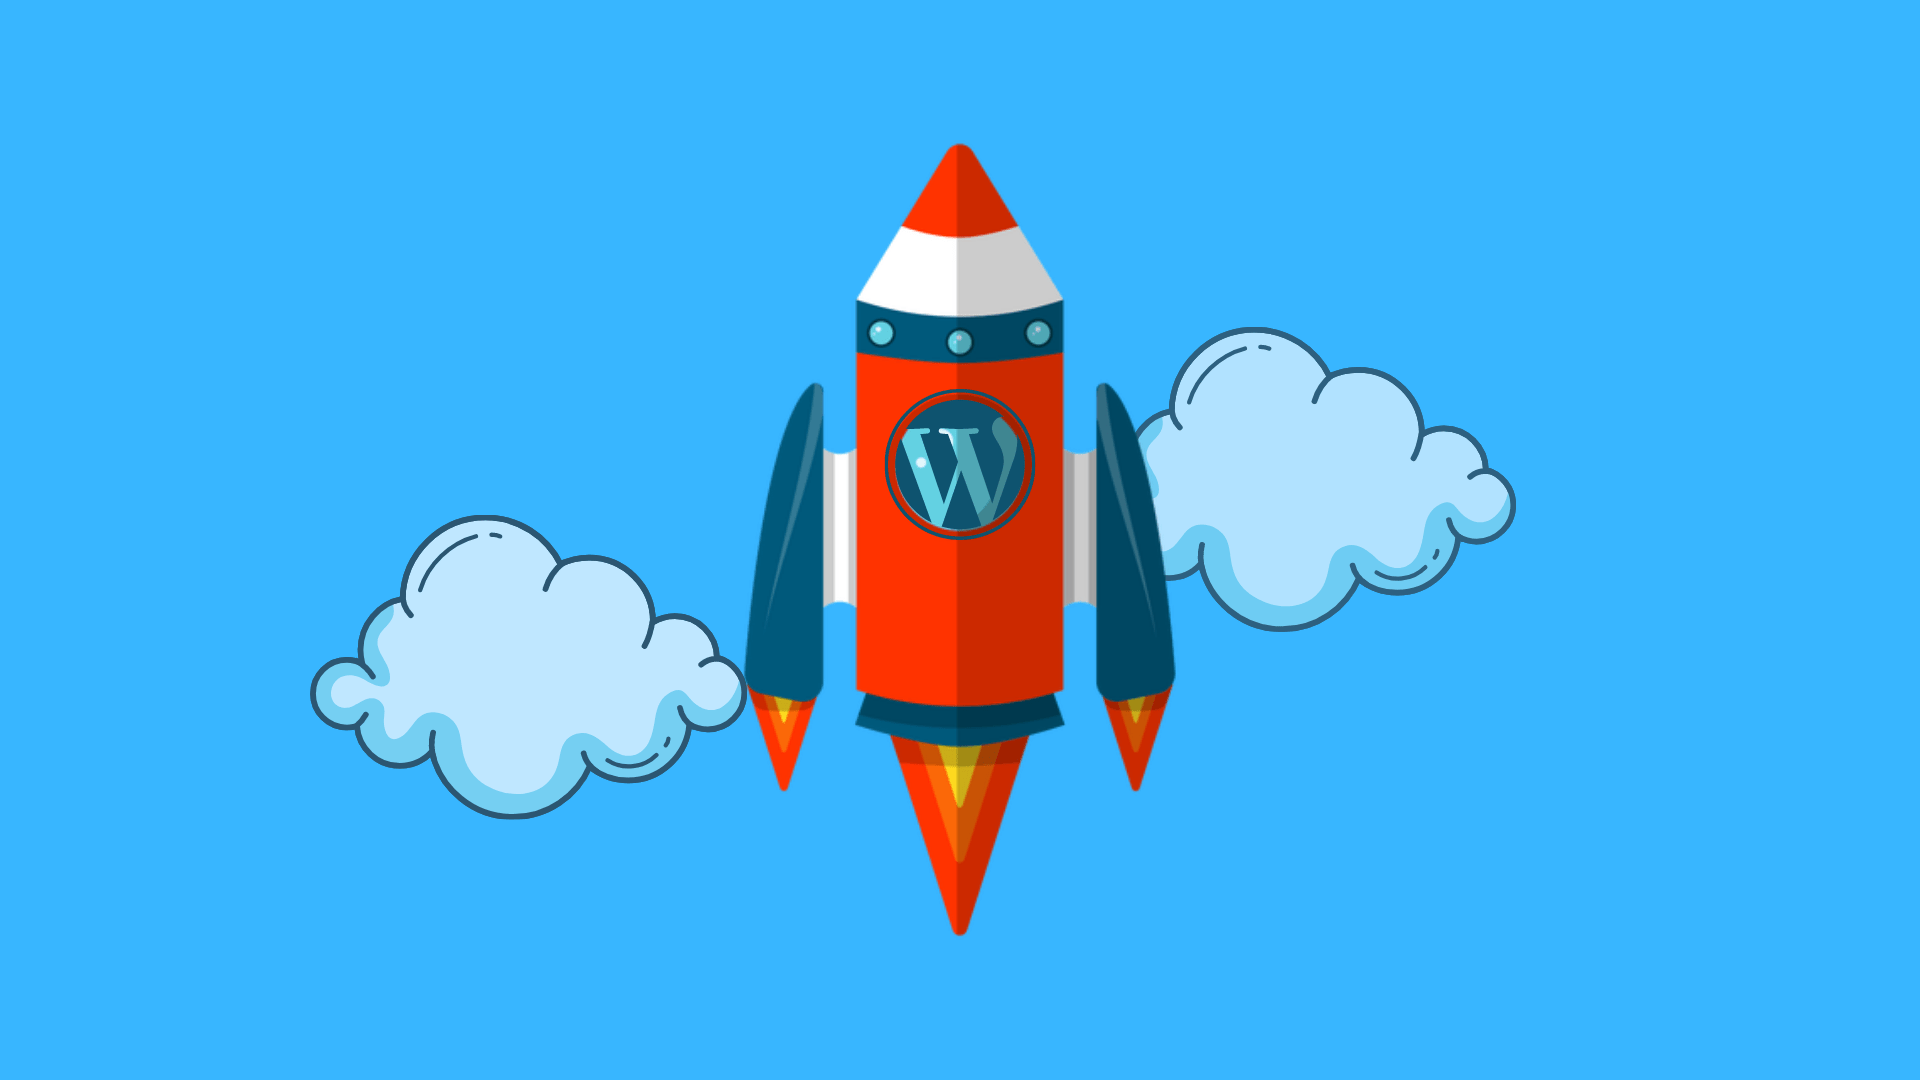 We discuss the main perceptions about the future of WordPress.